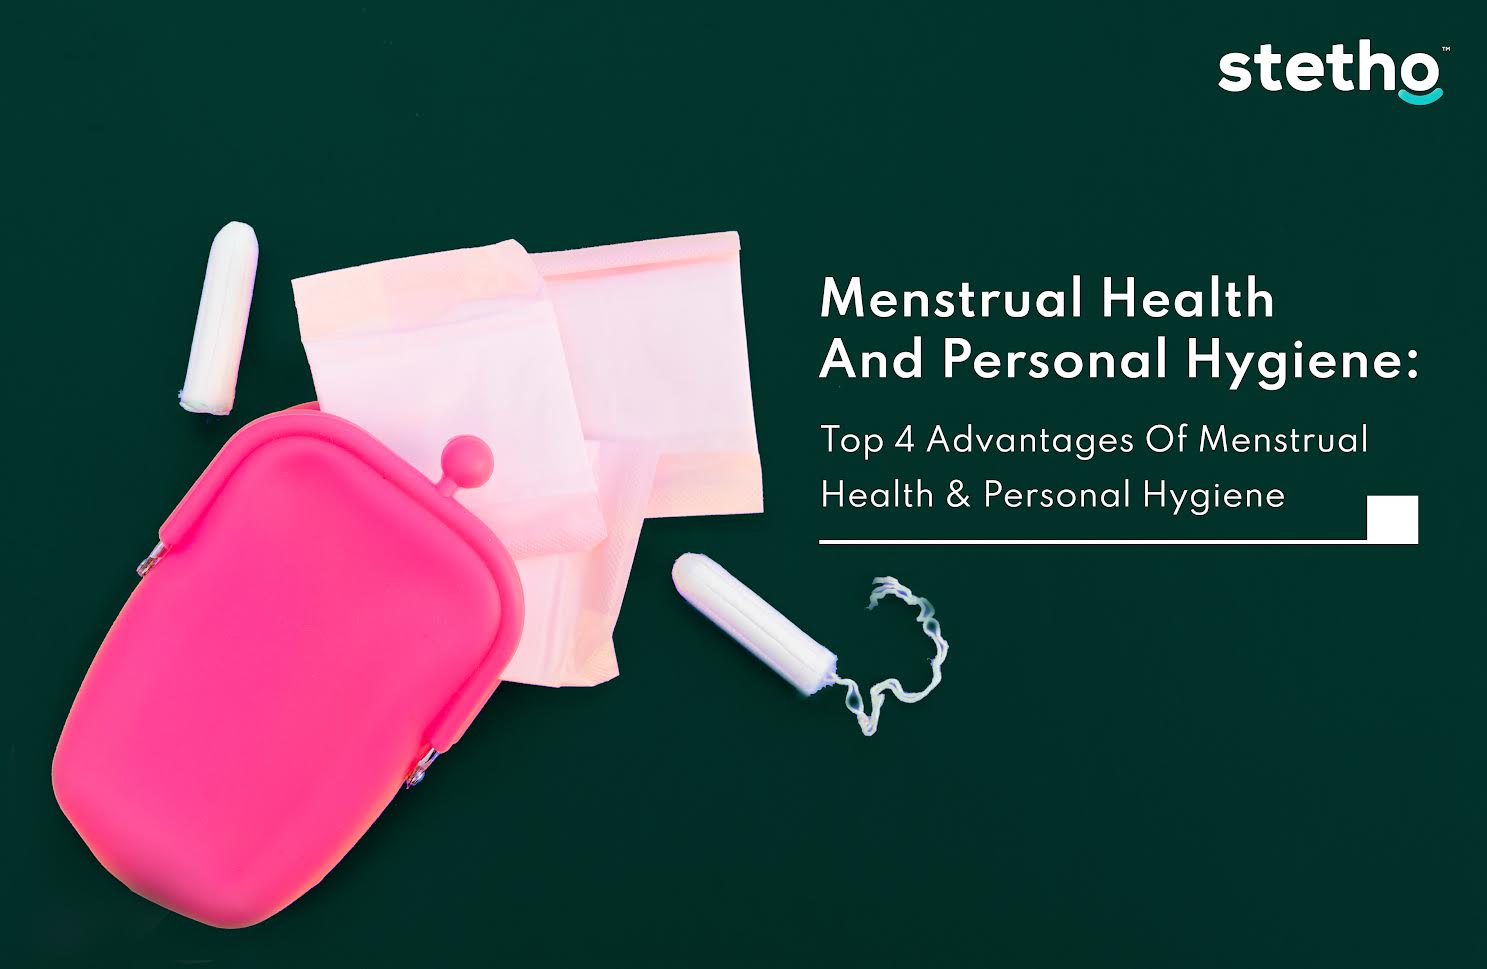 Menstrual Health and Personal Hygiene